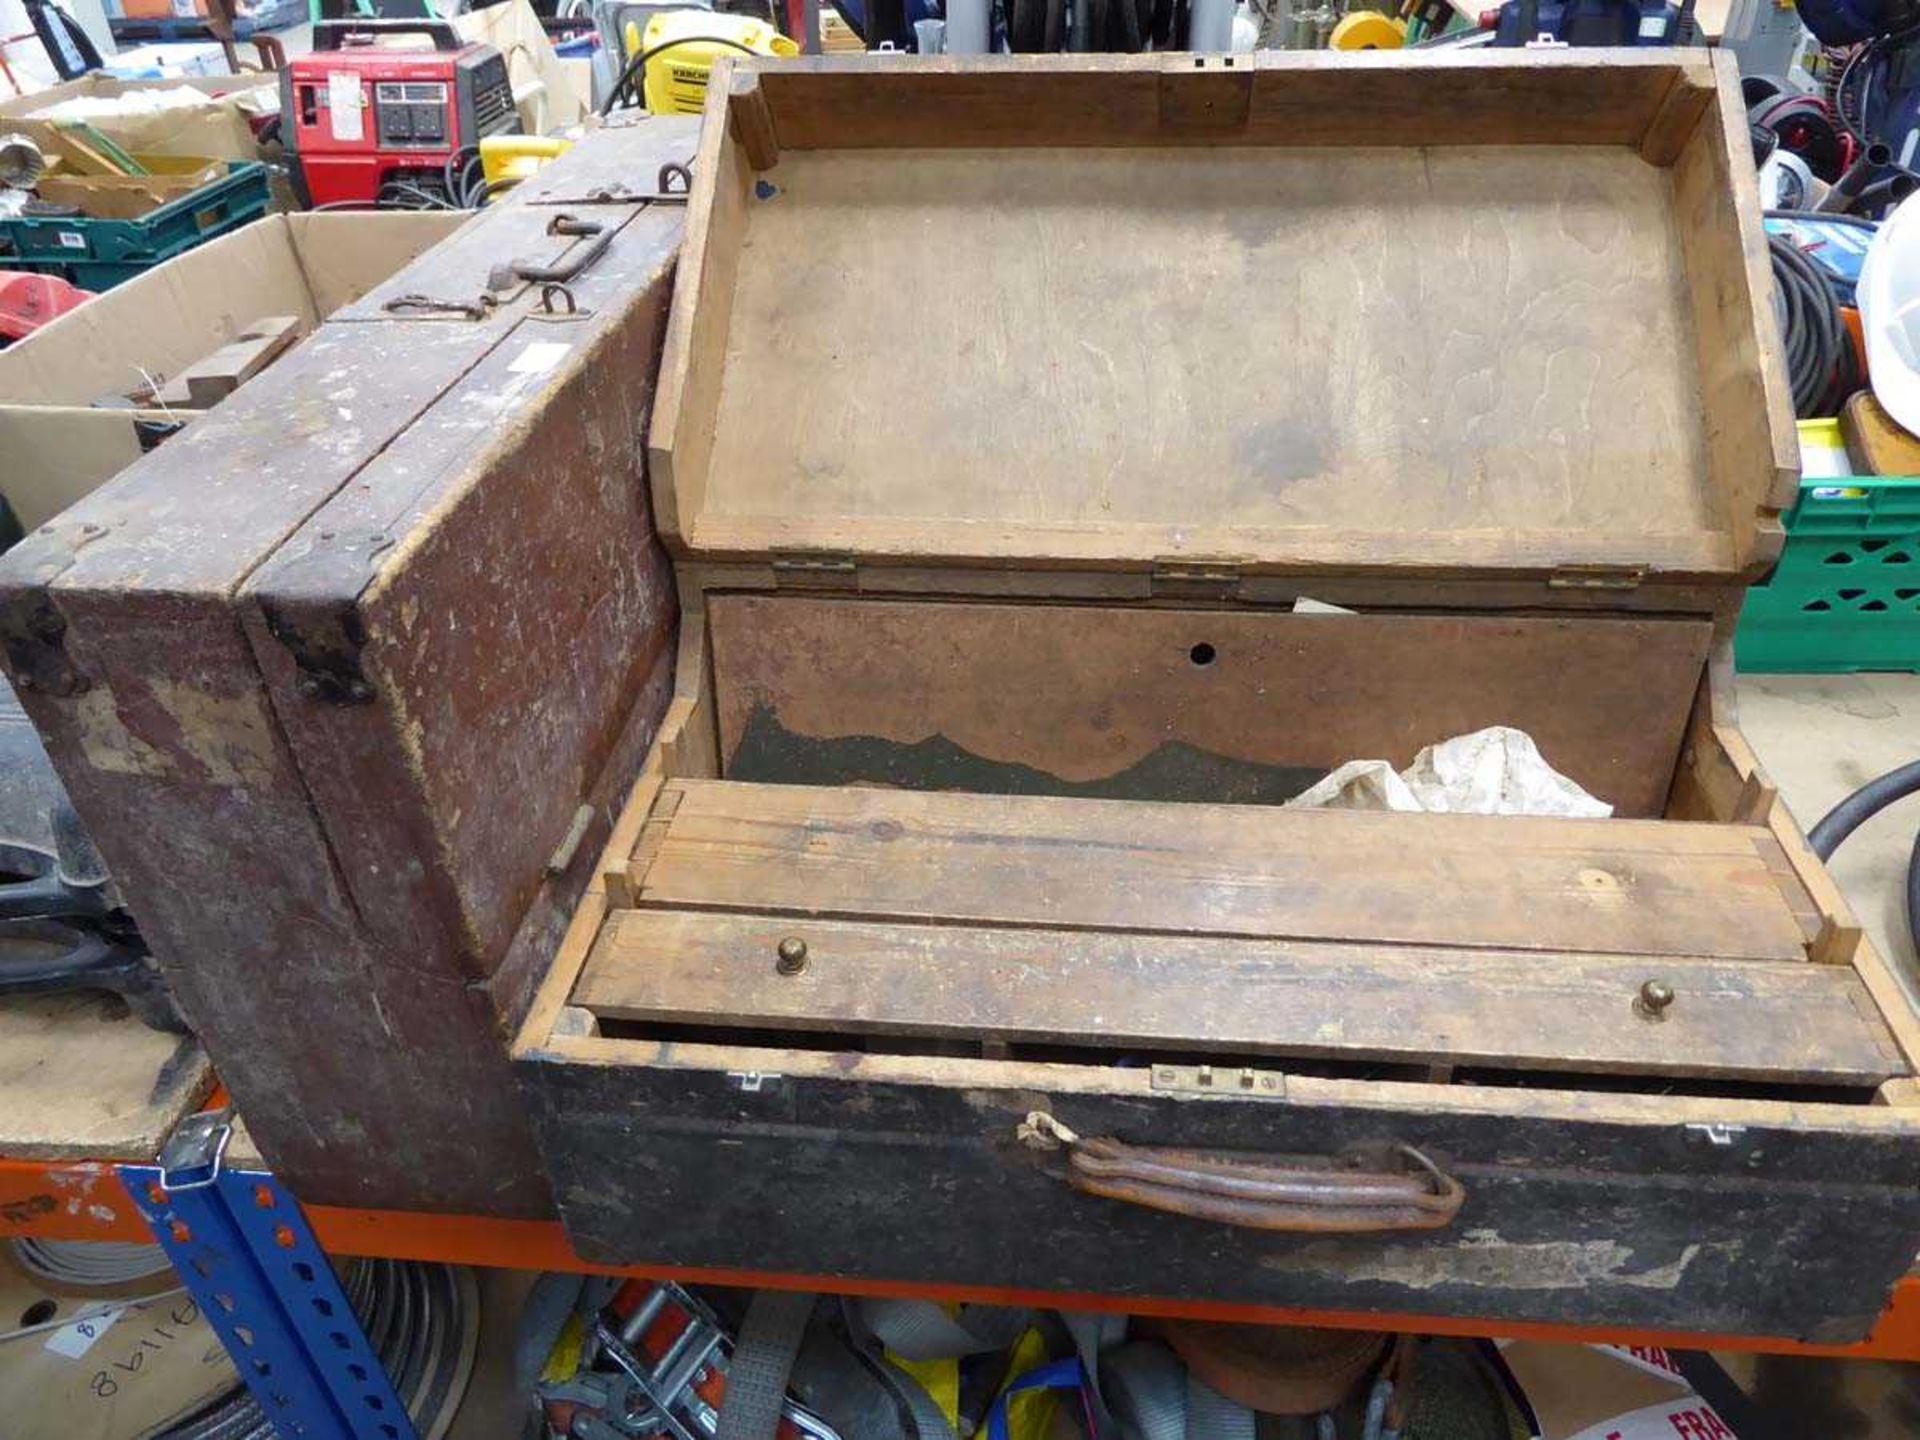 2 x wooden toolboxes with various hand tools